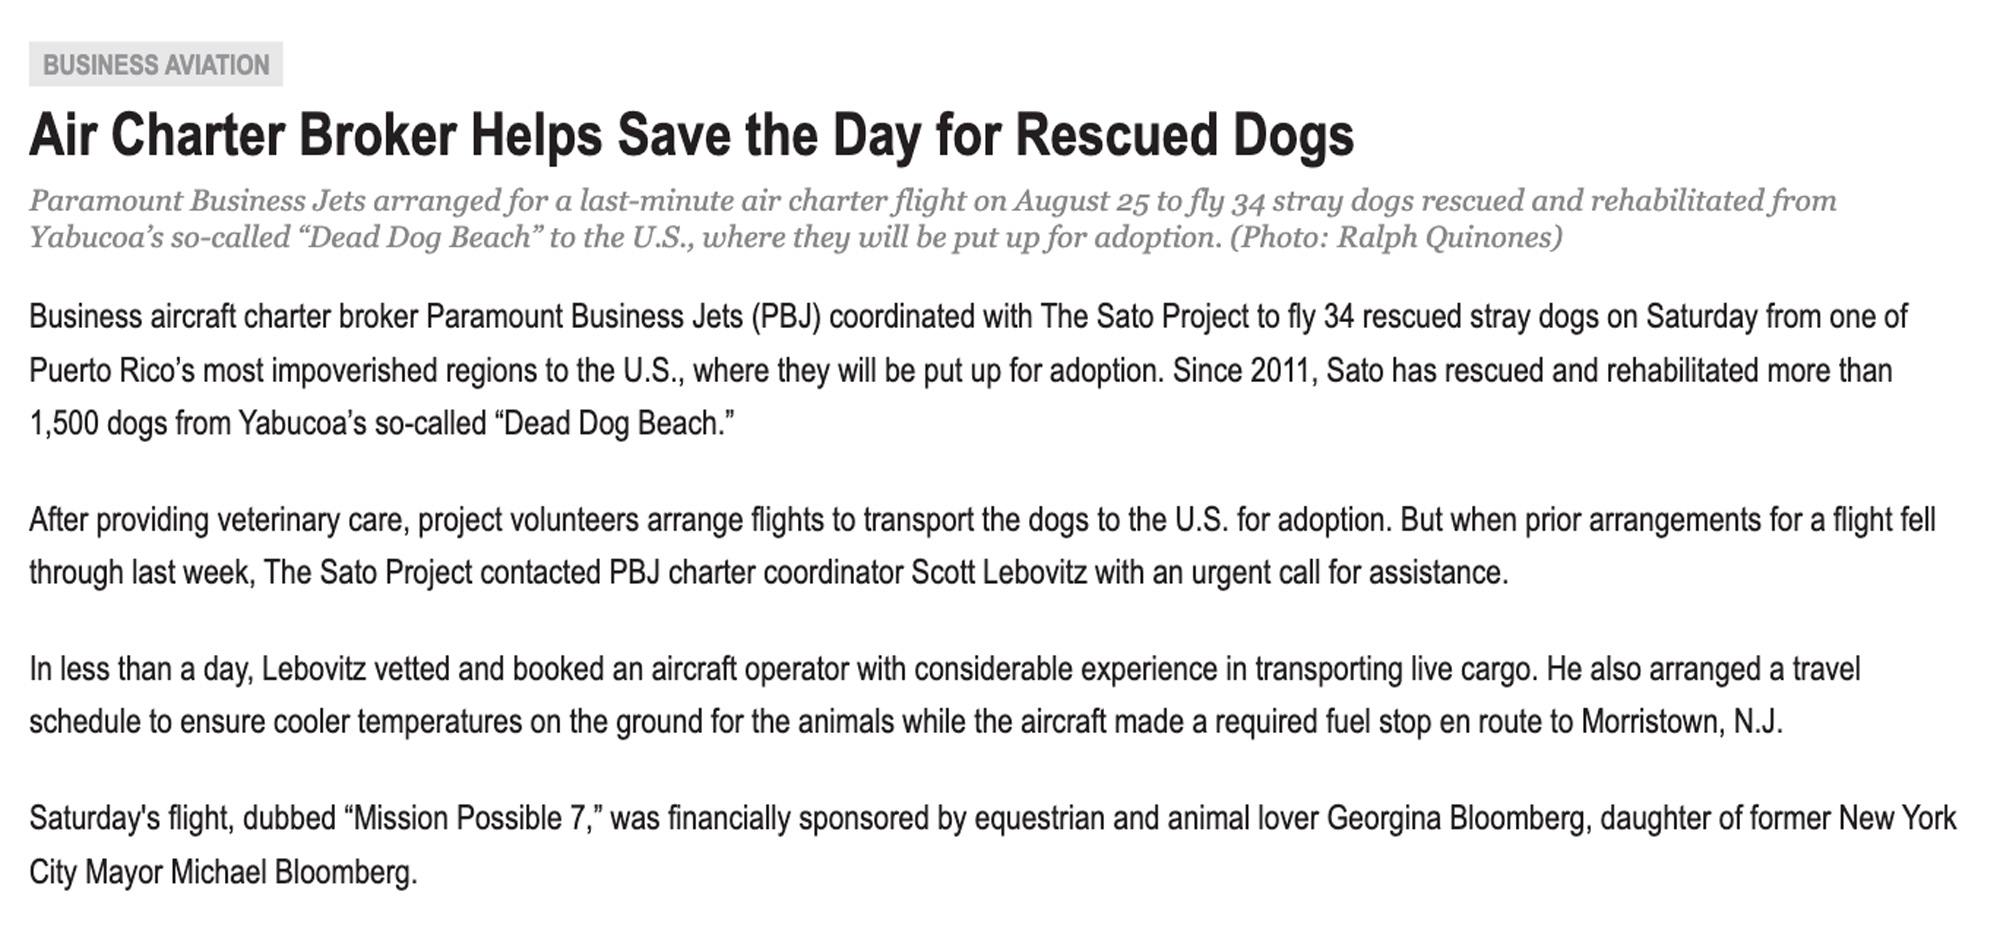 Article on how air charter broker helps save the day for rescued dogs